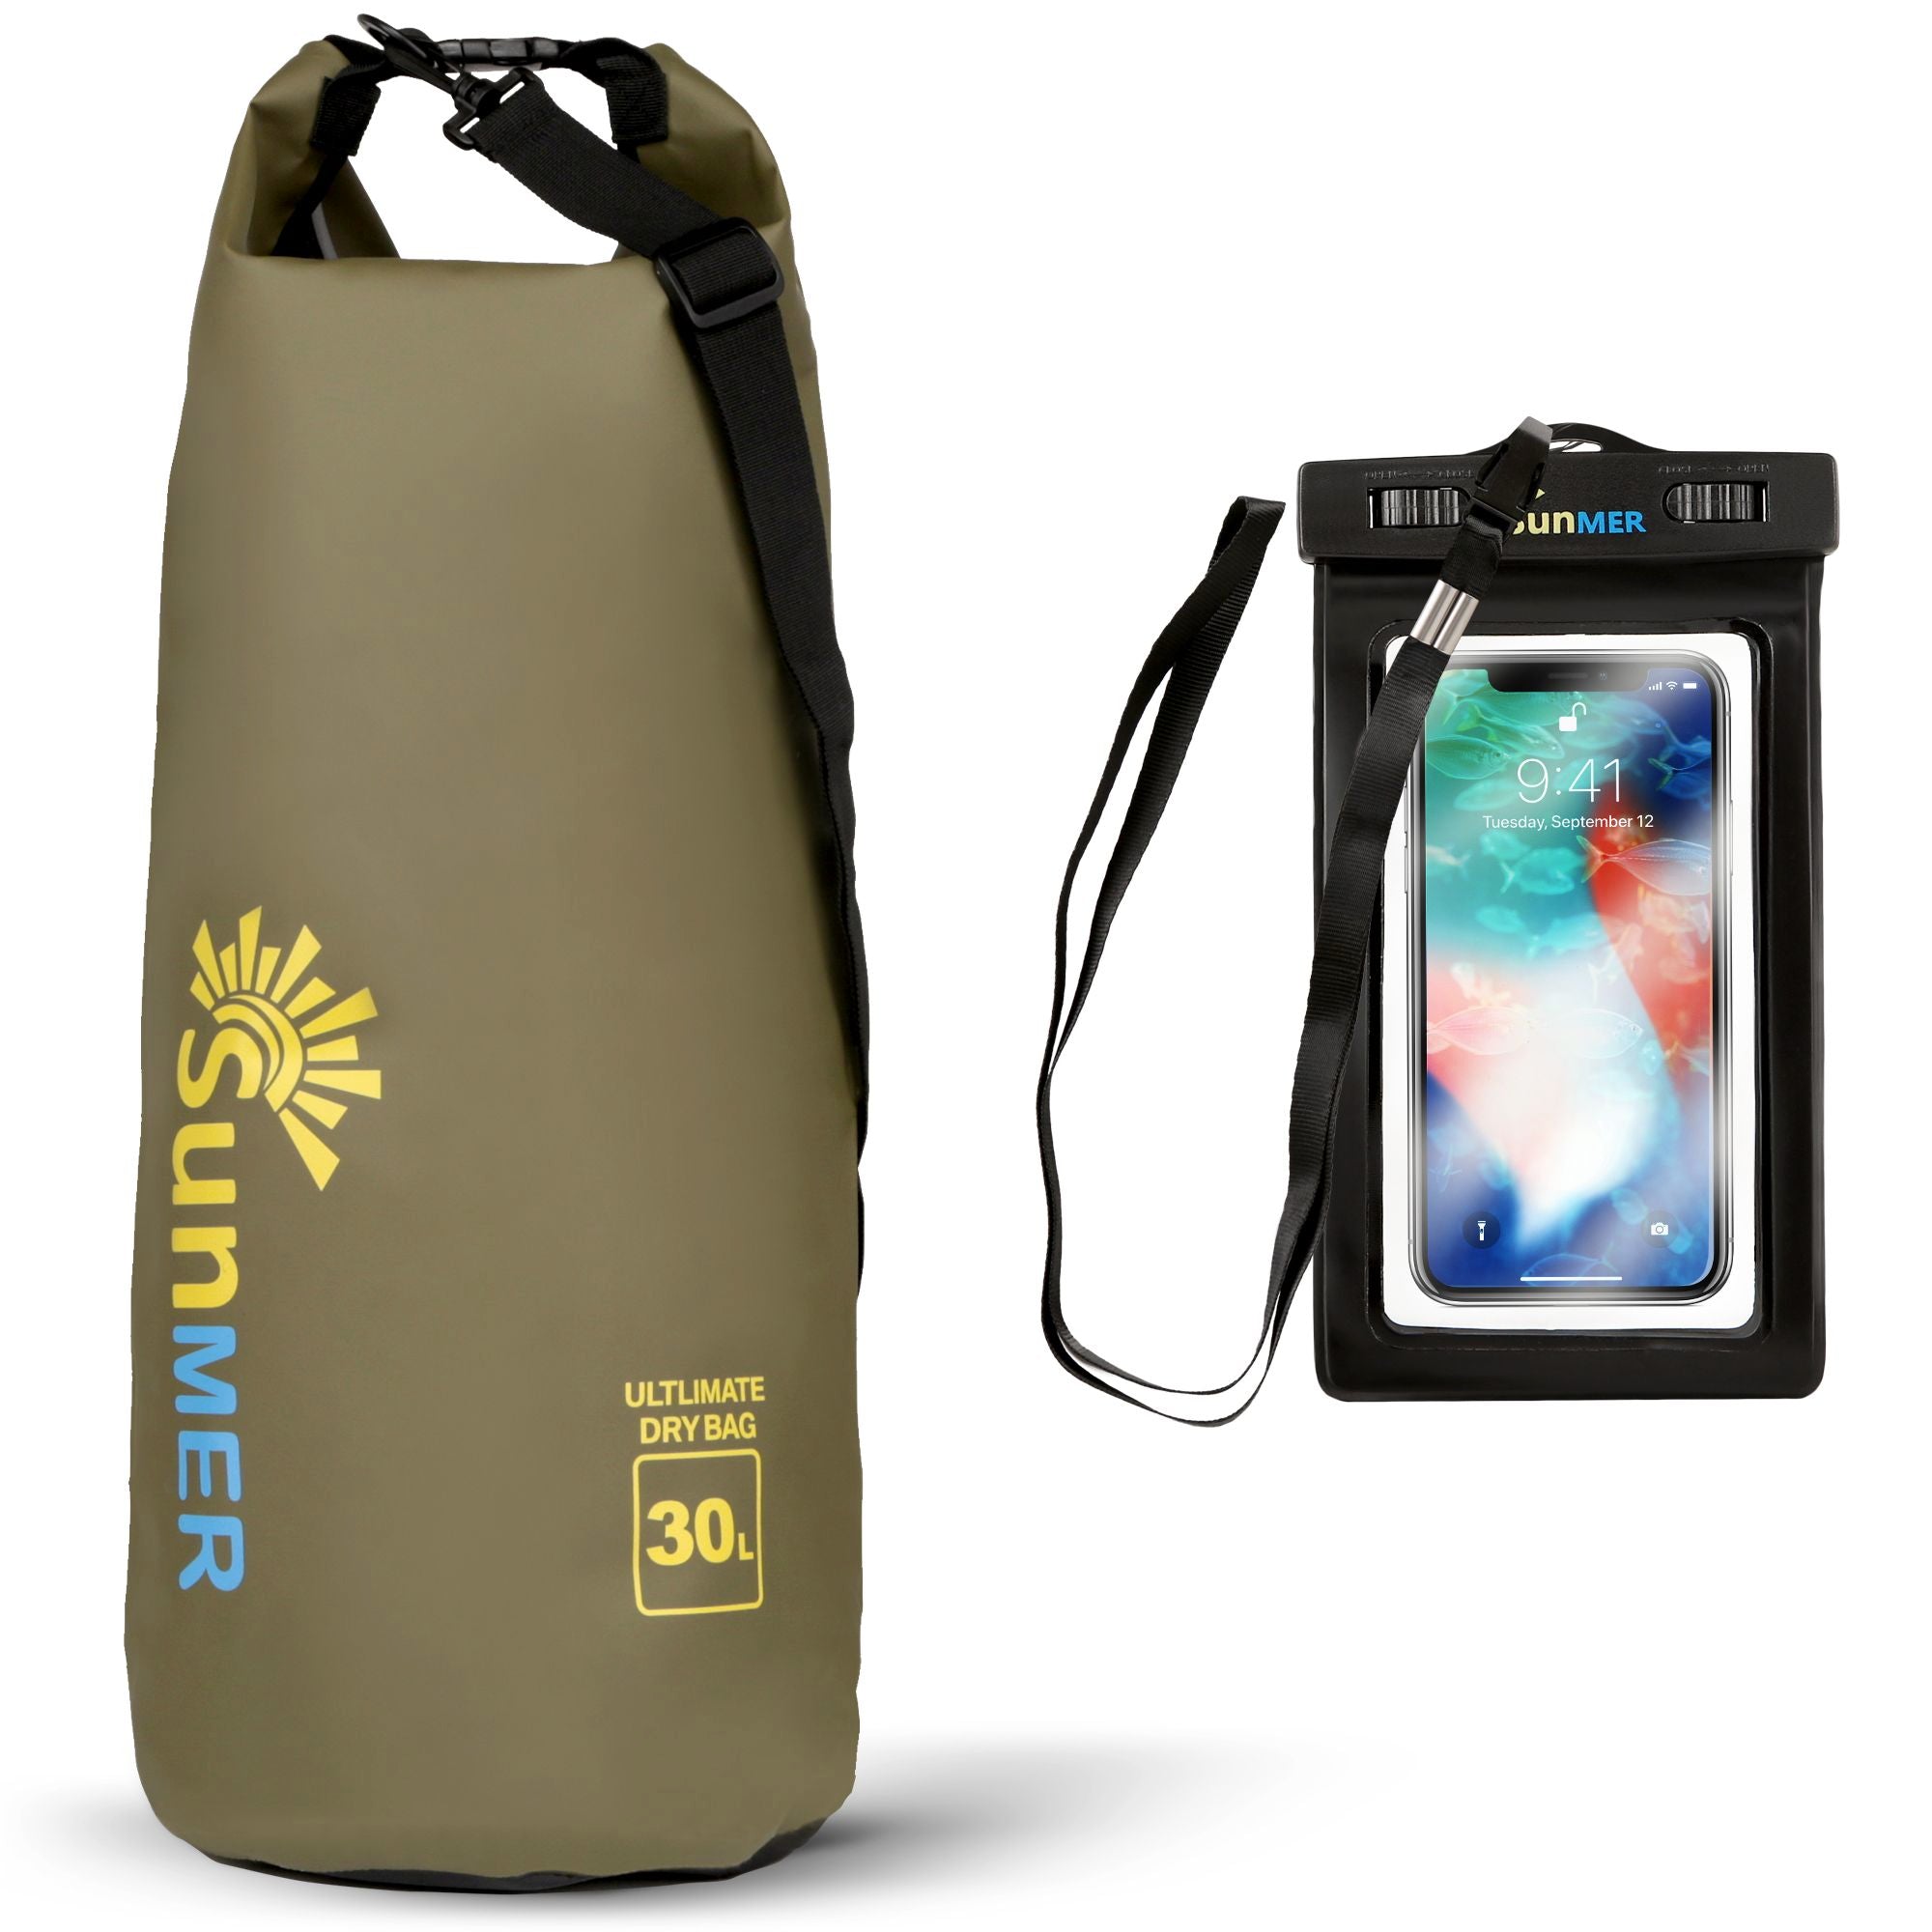 30L Dry Bag With Waterproof Phone Case - Army Green